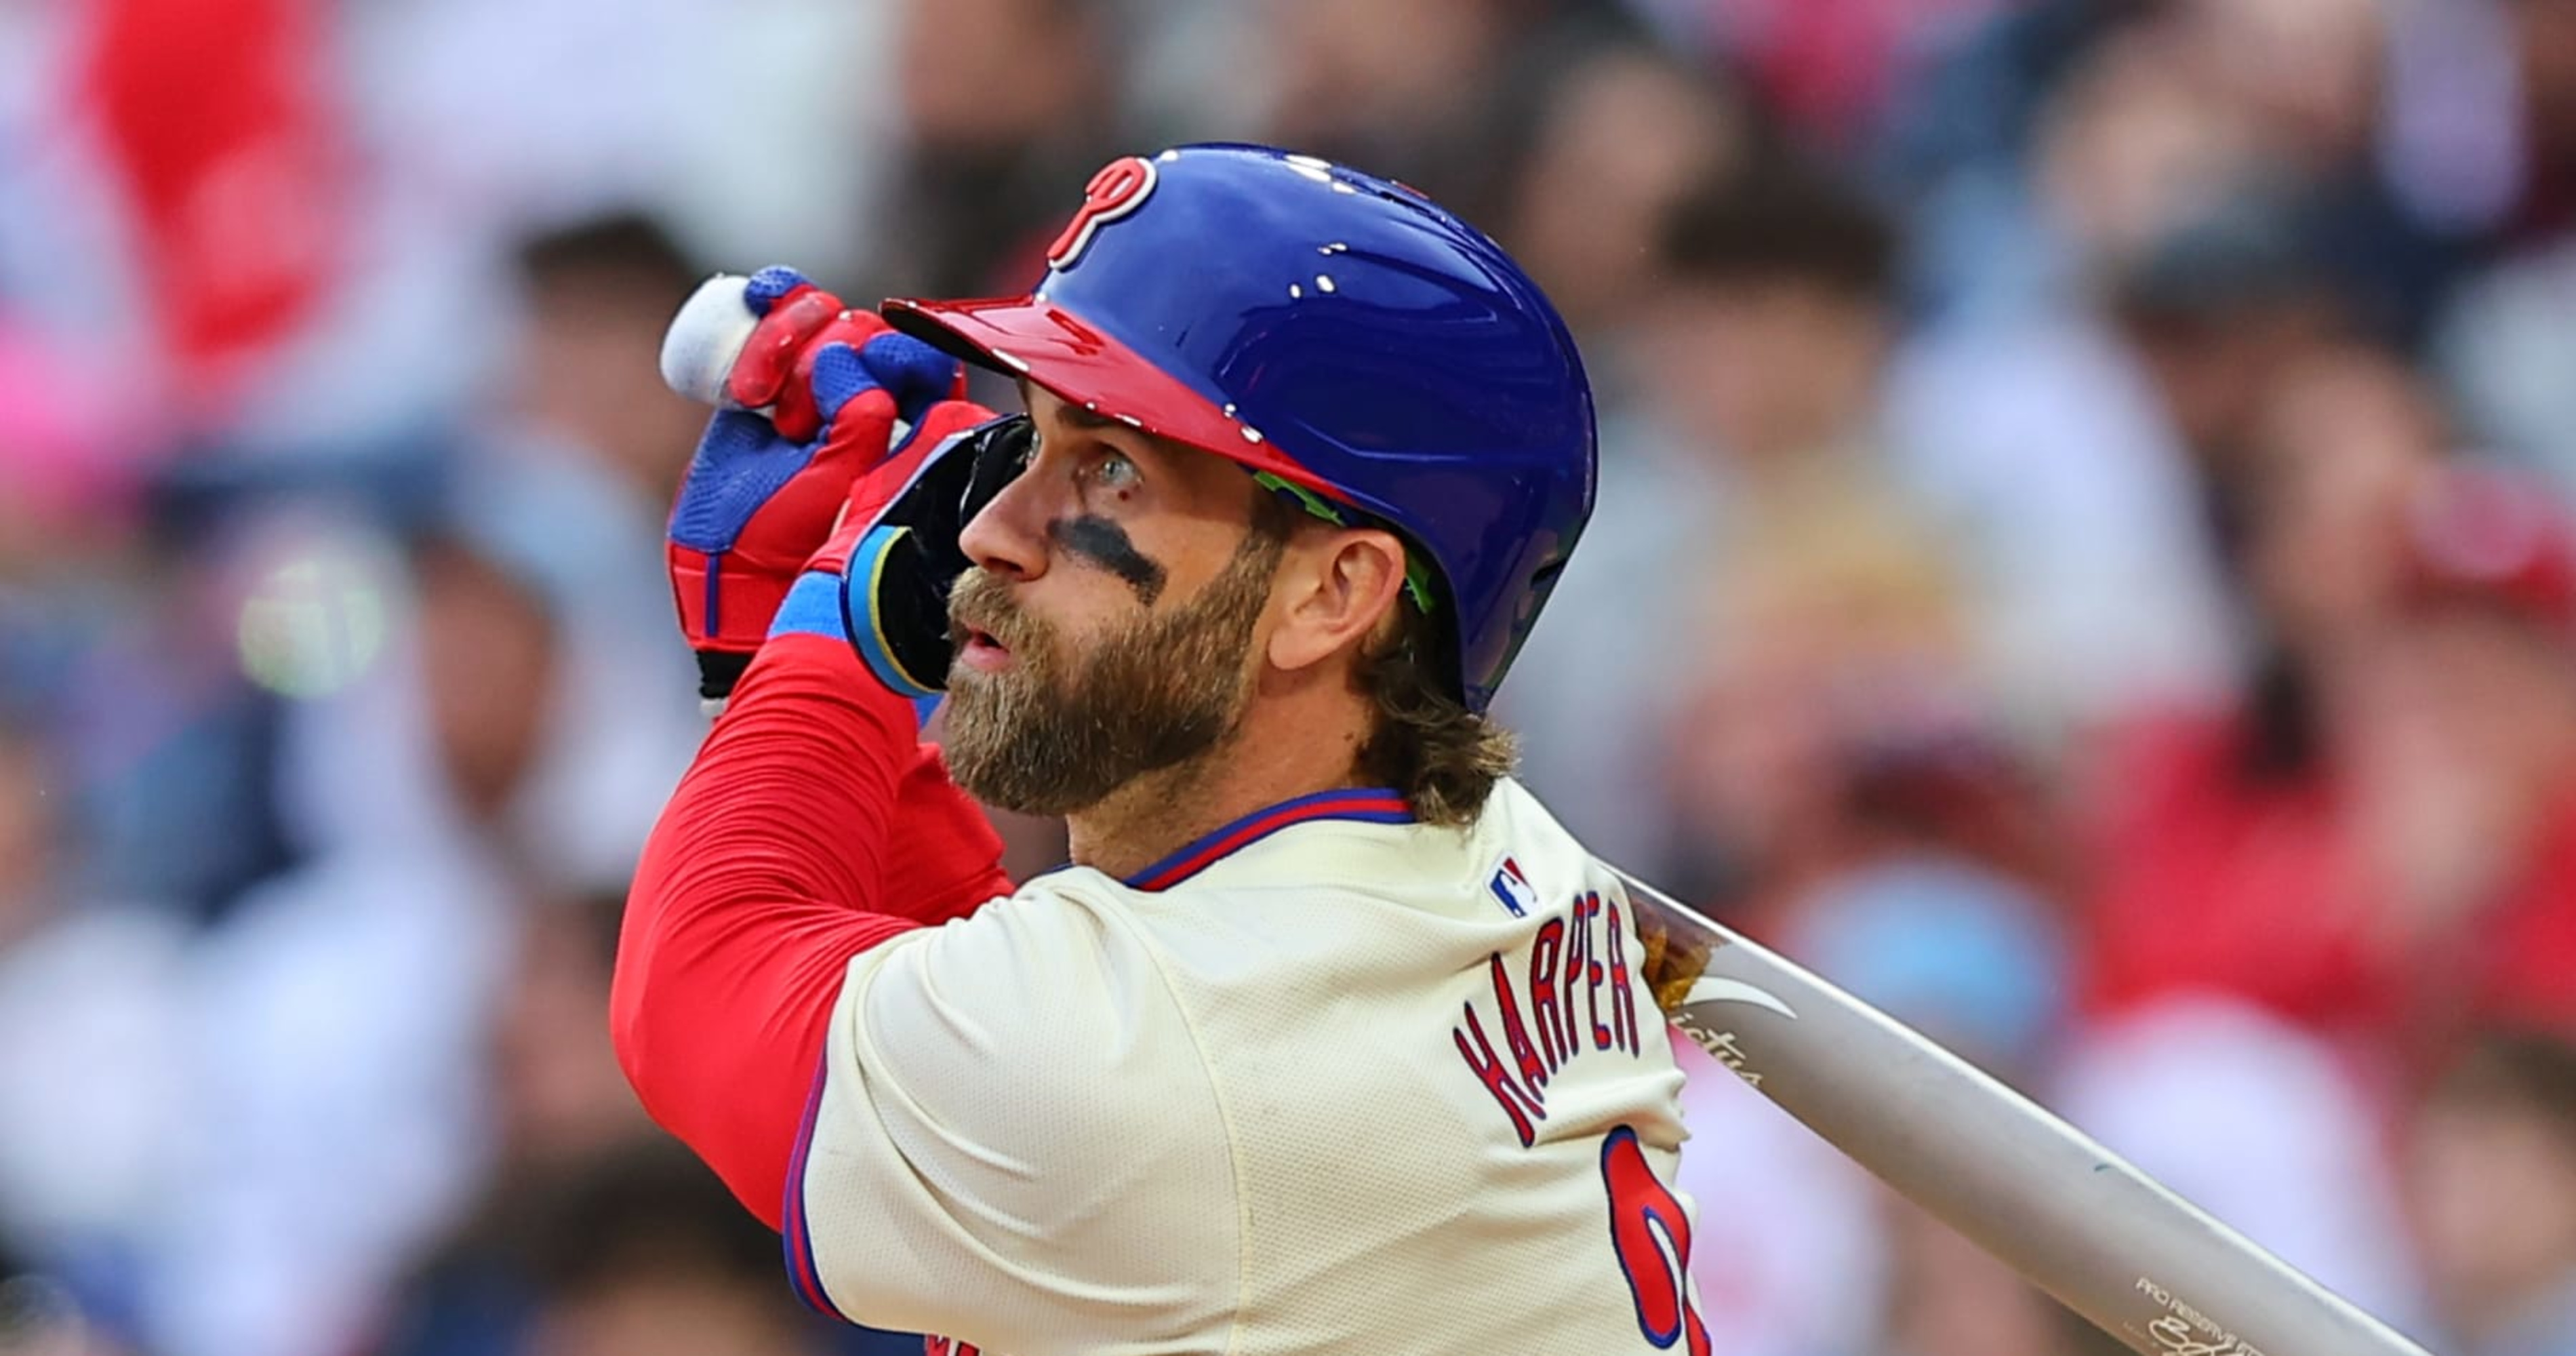 Phillies' Bryce Harper Thrills MLB Fans with 3 HRs vs. Reds for First Hits of Season